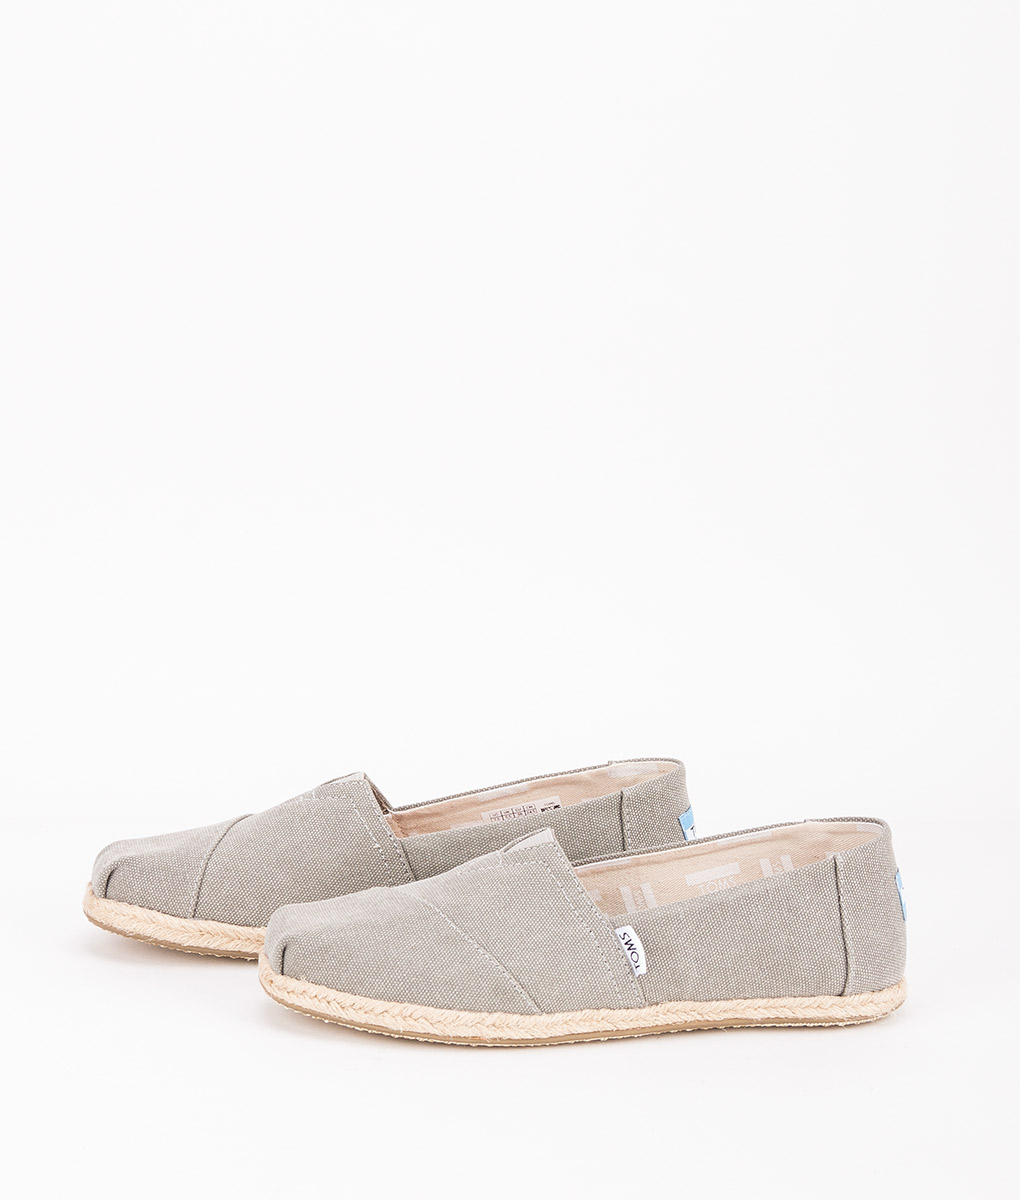 drizzle grey washed canvas women's espadrilles